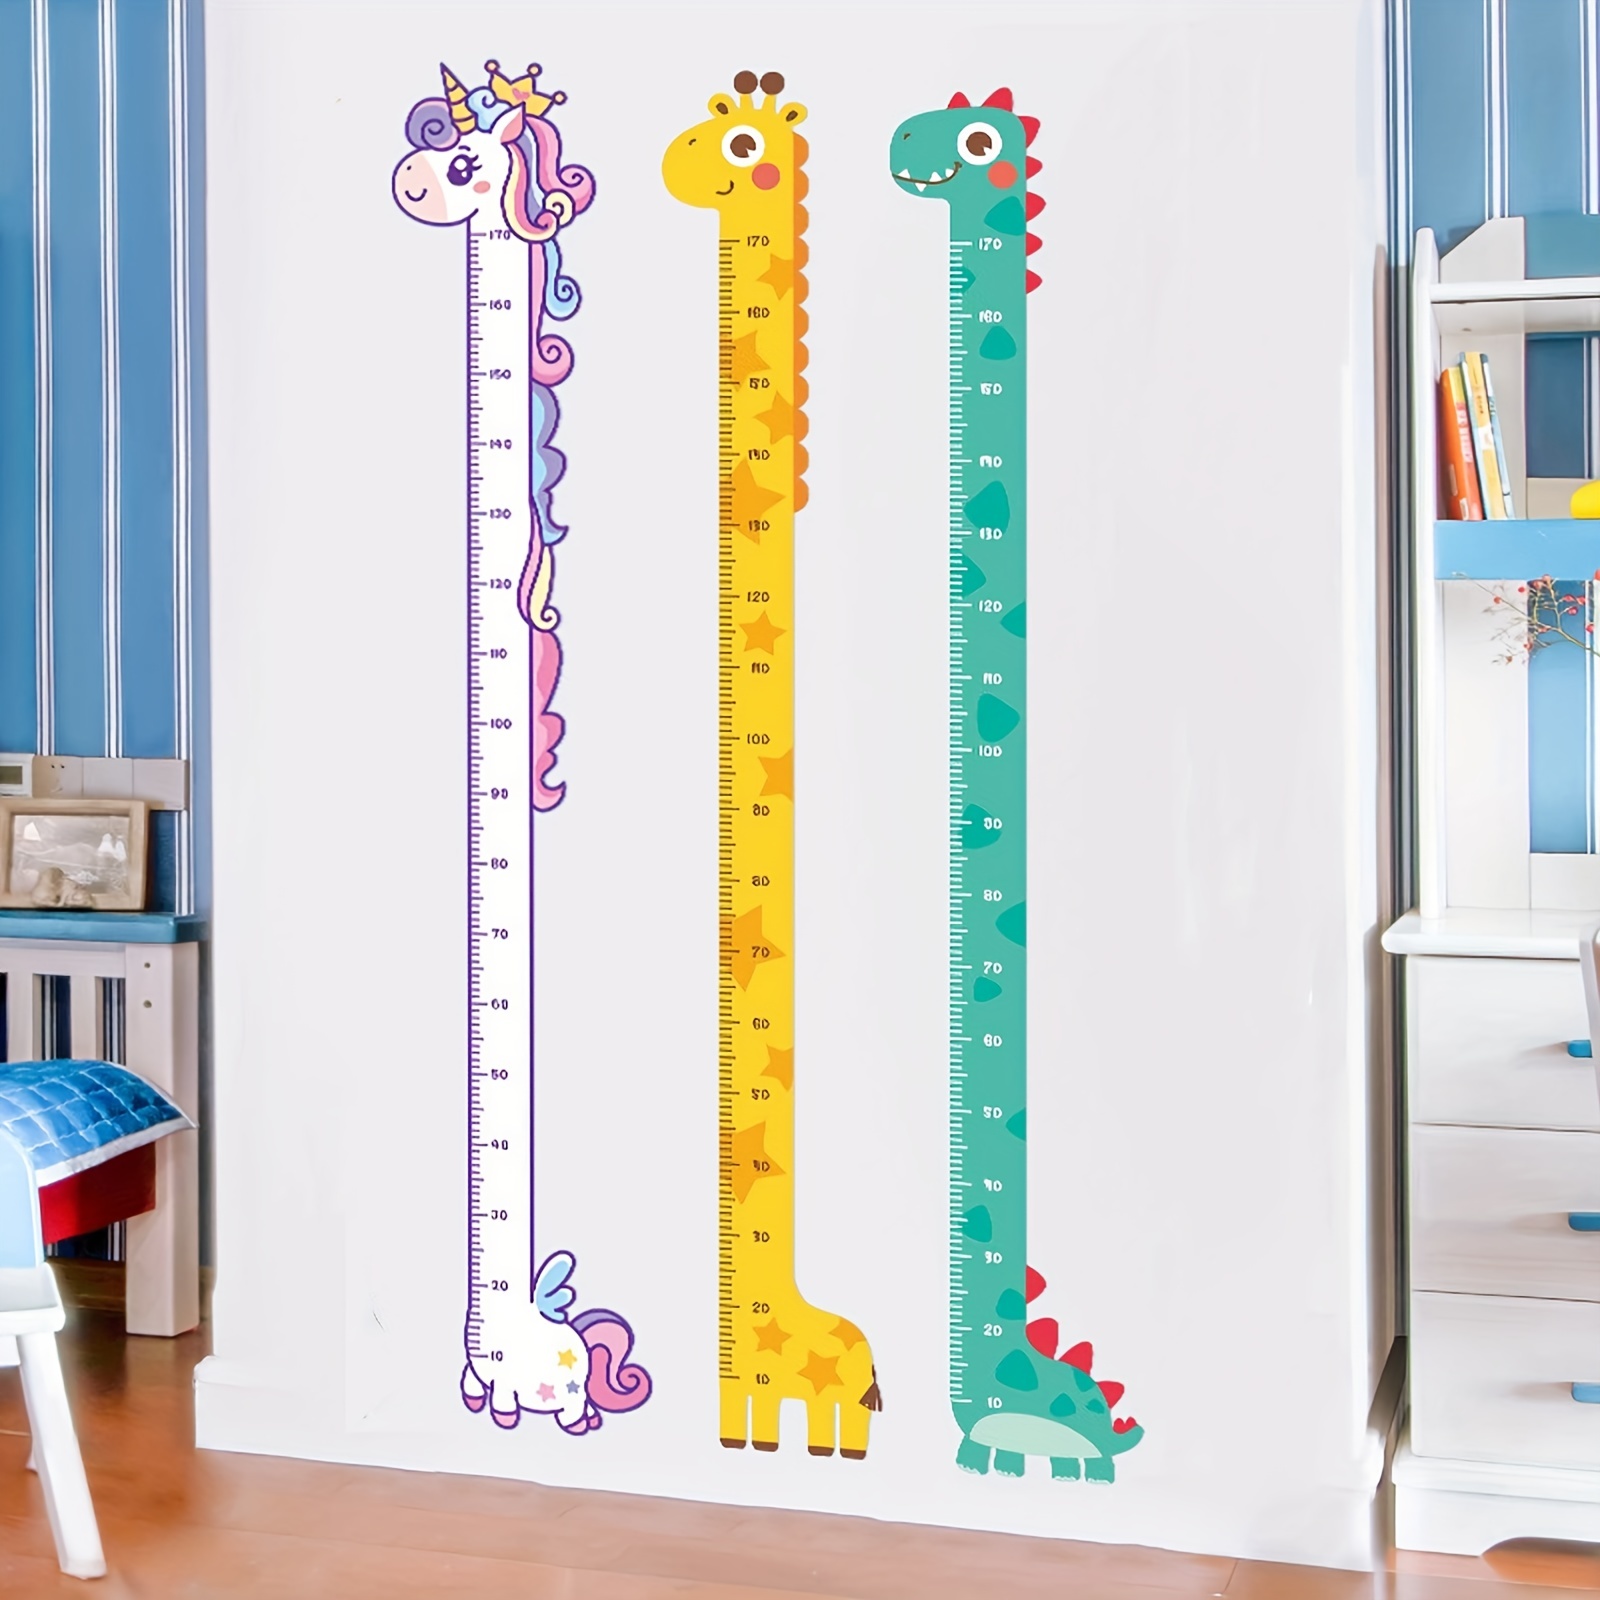 

1pc Unicorn Giraffe Dinosaur Height Wall Sticker - Creative Cartoon Measuring Height Sticker For Room And Home Decor - Self-adhesive And Removable